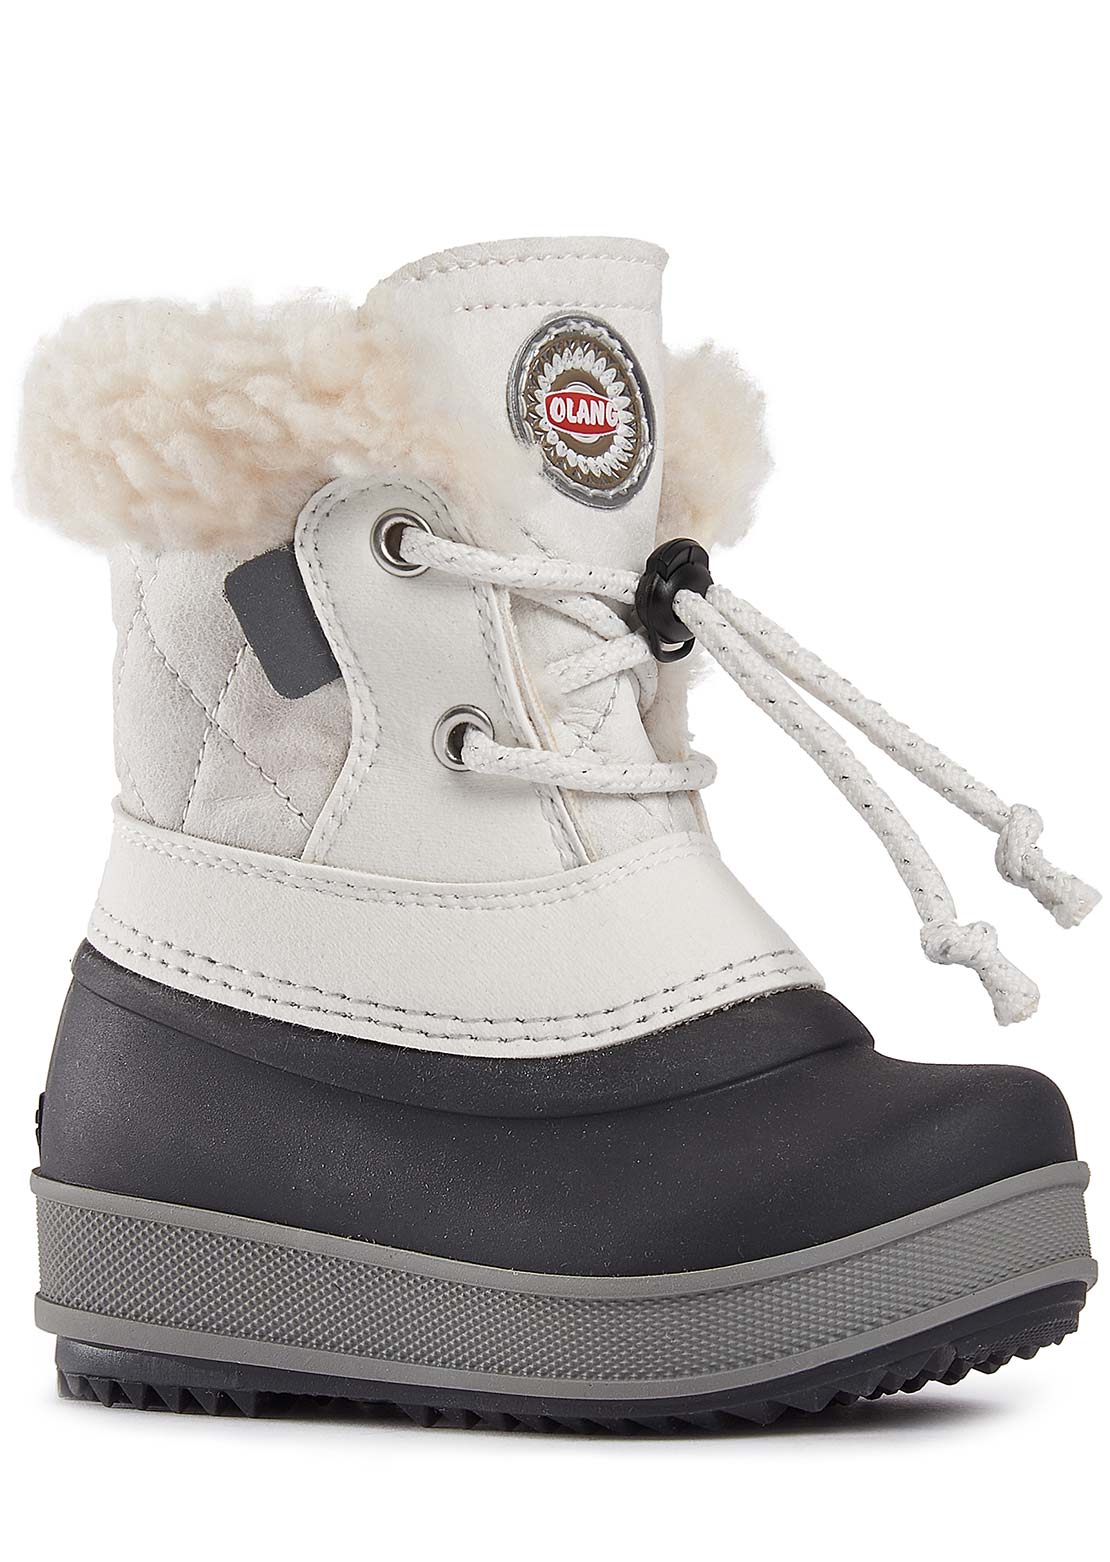 Olang Toddler Ape Boots Bianco